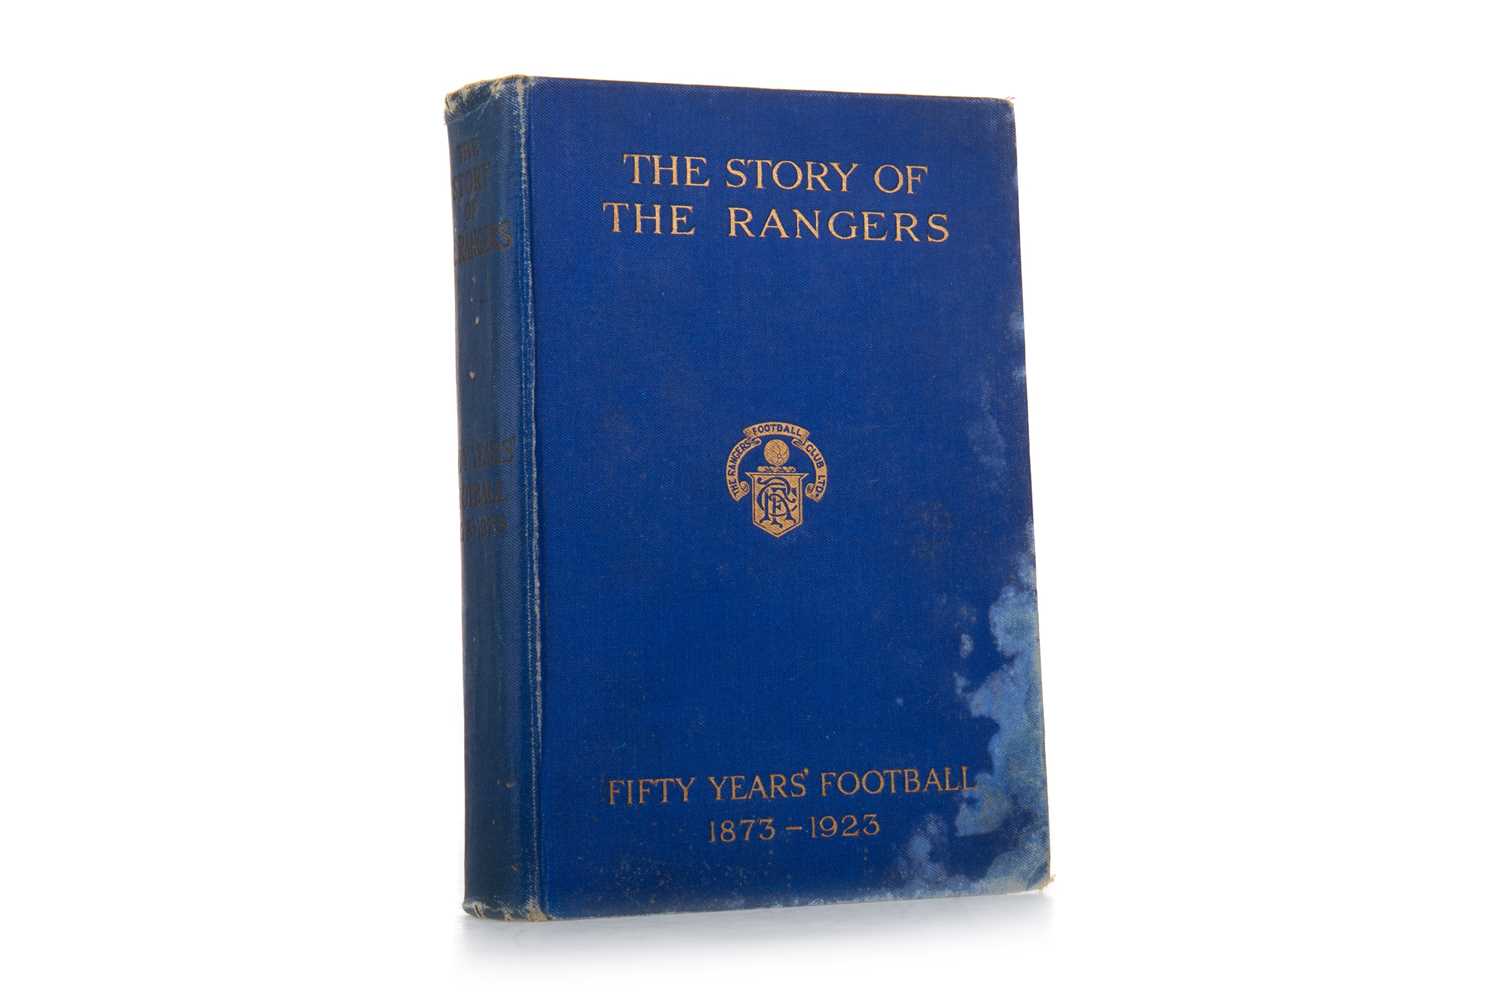 AUTOGRAPHED COPY OF THE STORY OF RANGERS: FIFTY YEARS' FOOTBALL 1873-1923, ALLAN (JOHN), PUB. AIRD &